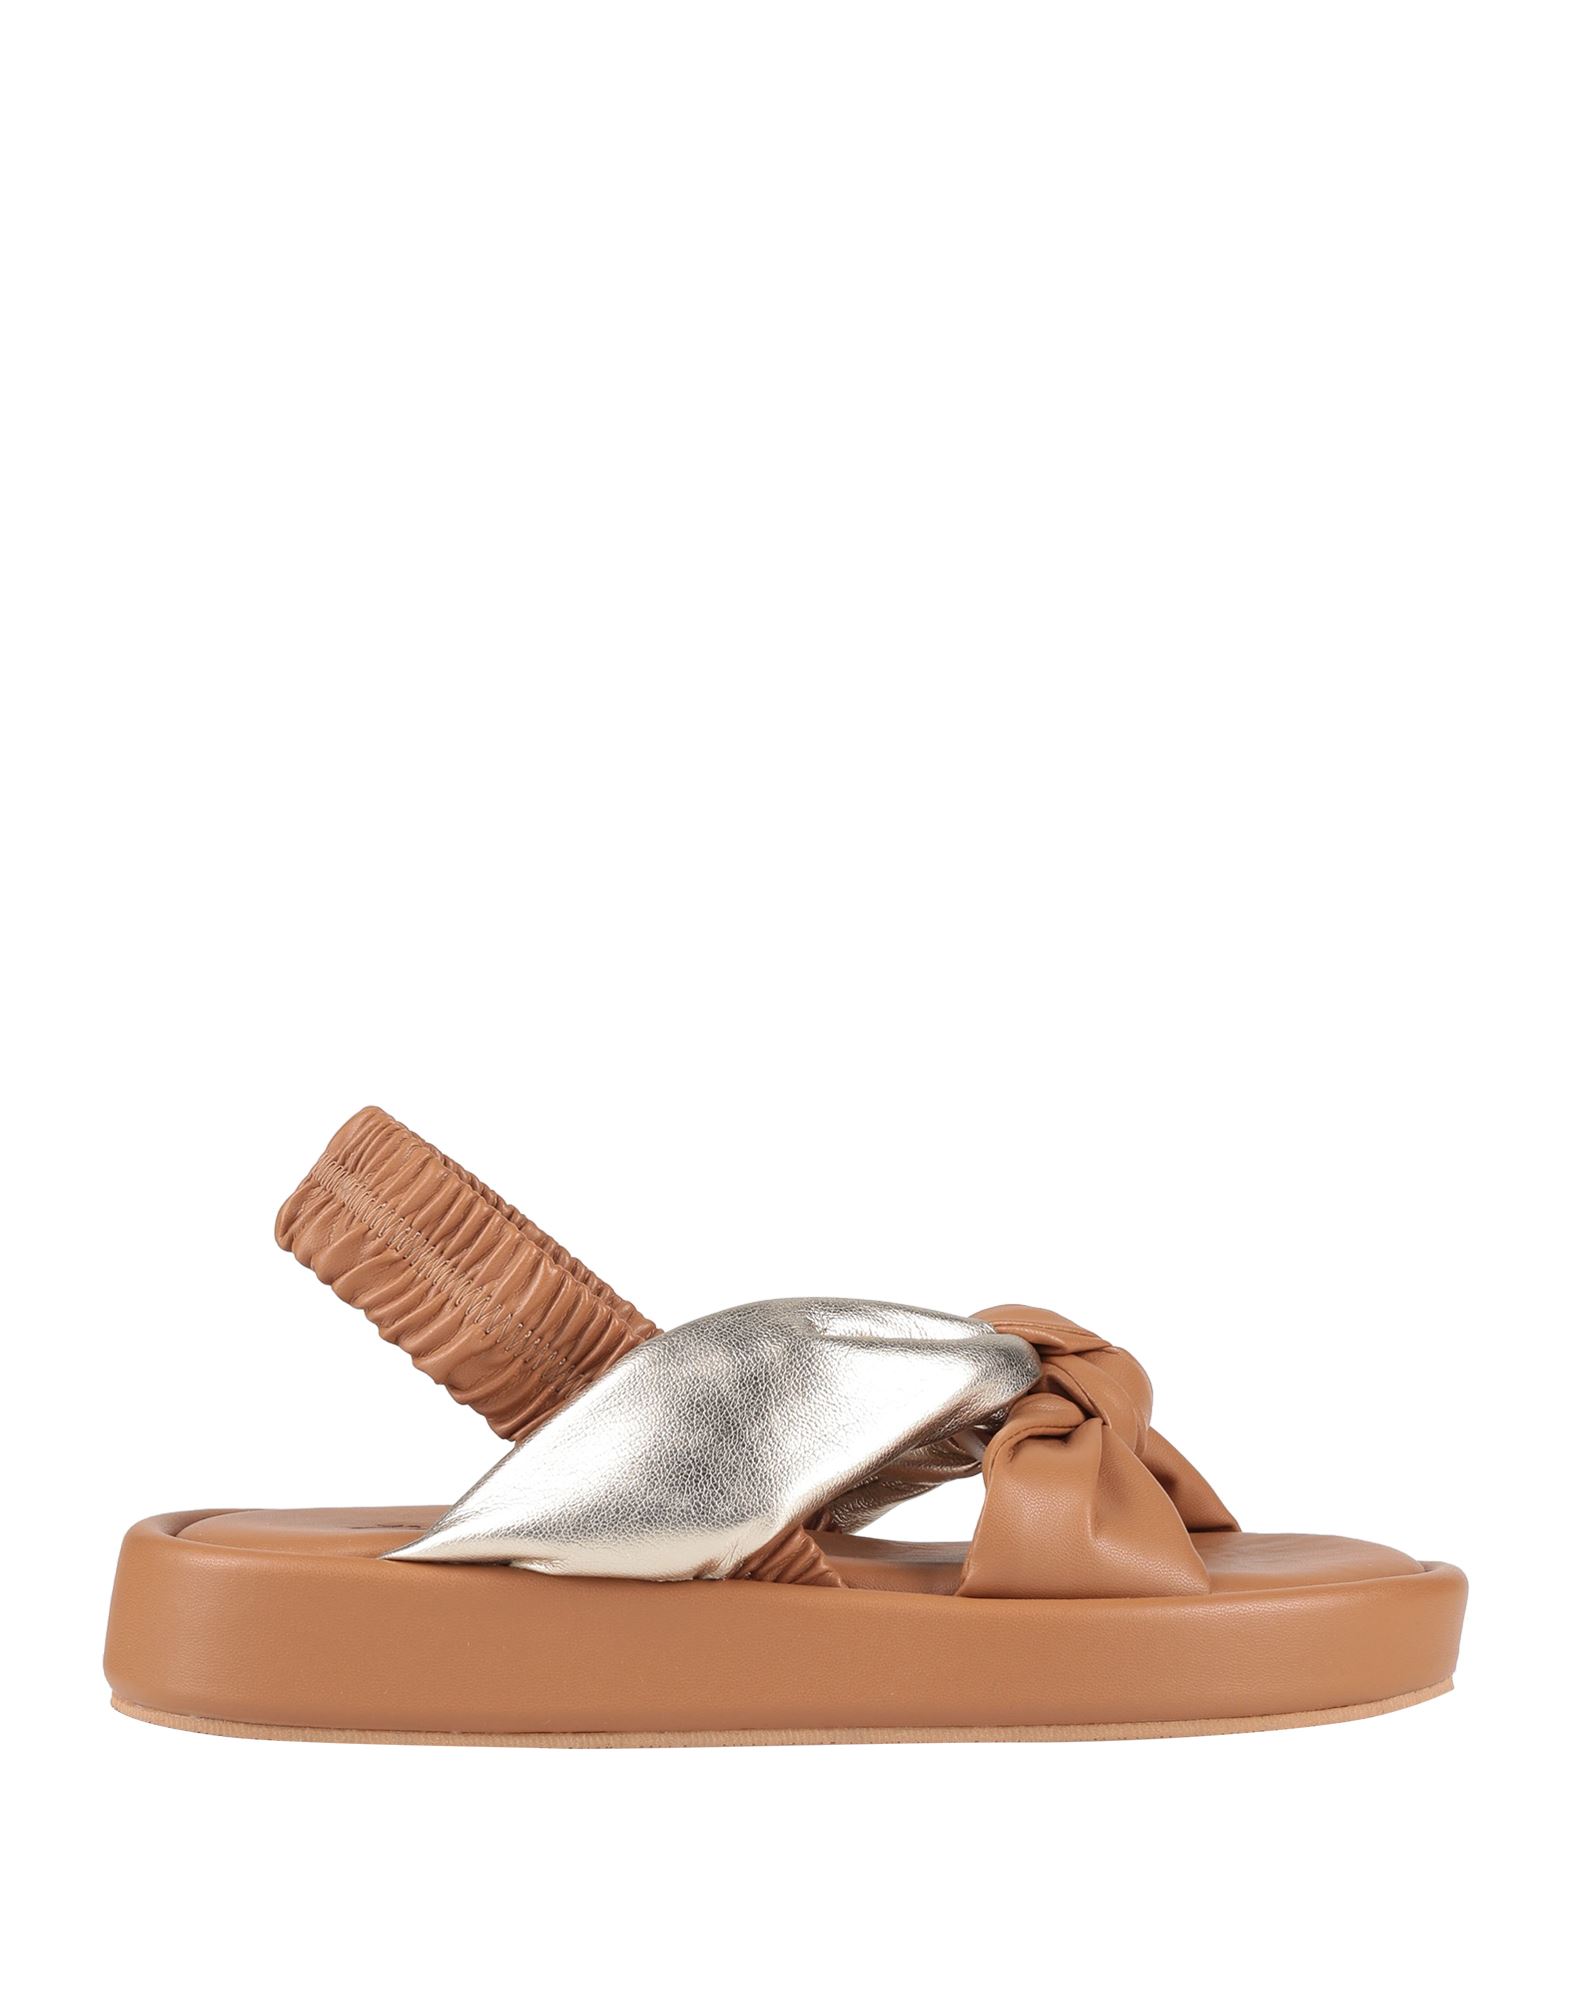 Paolo Mattei Sandals In Camel